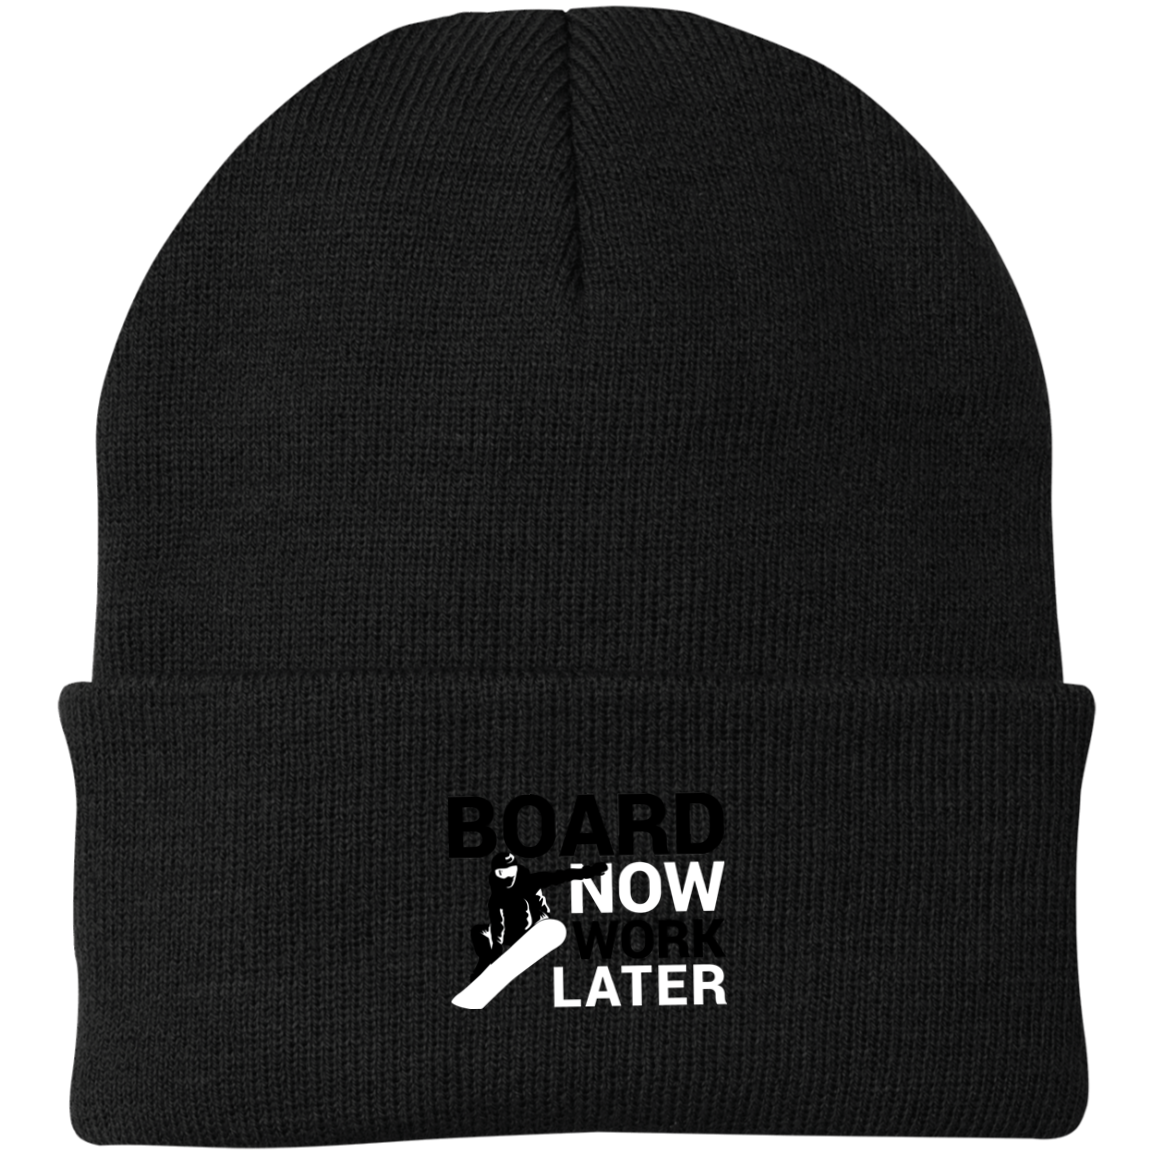 Board Now Work Later Knit Cap - Powderaddicts